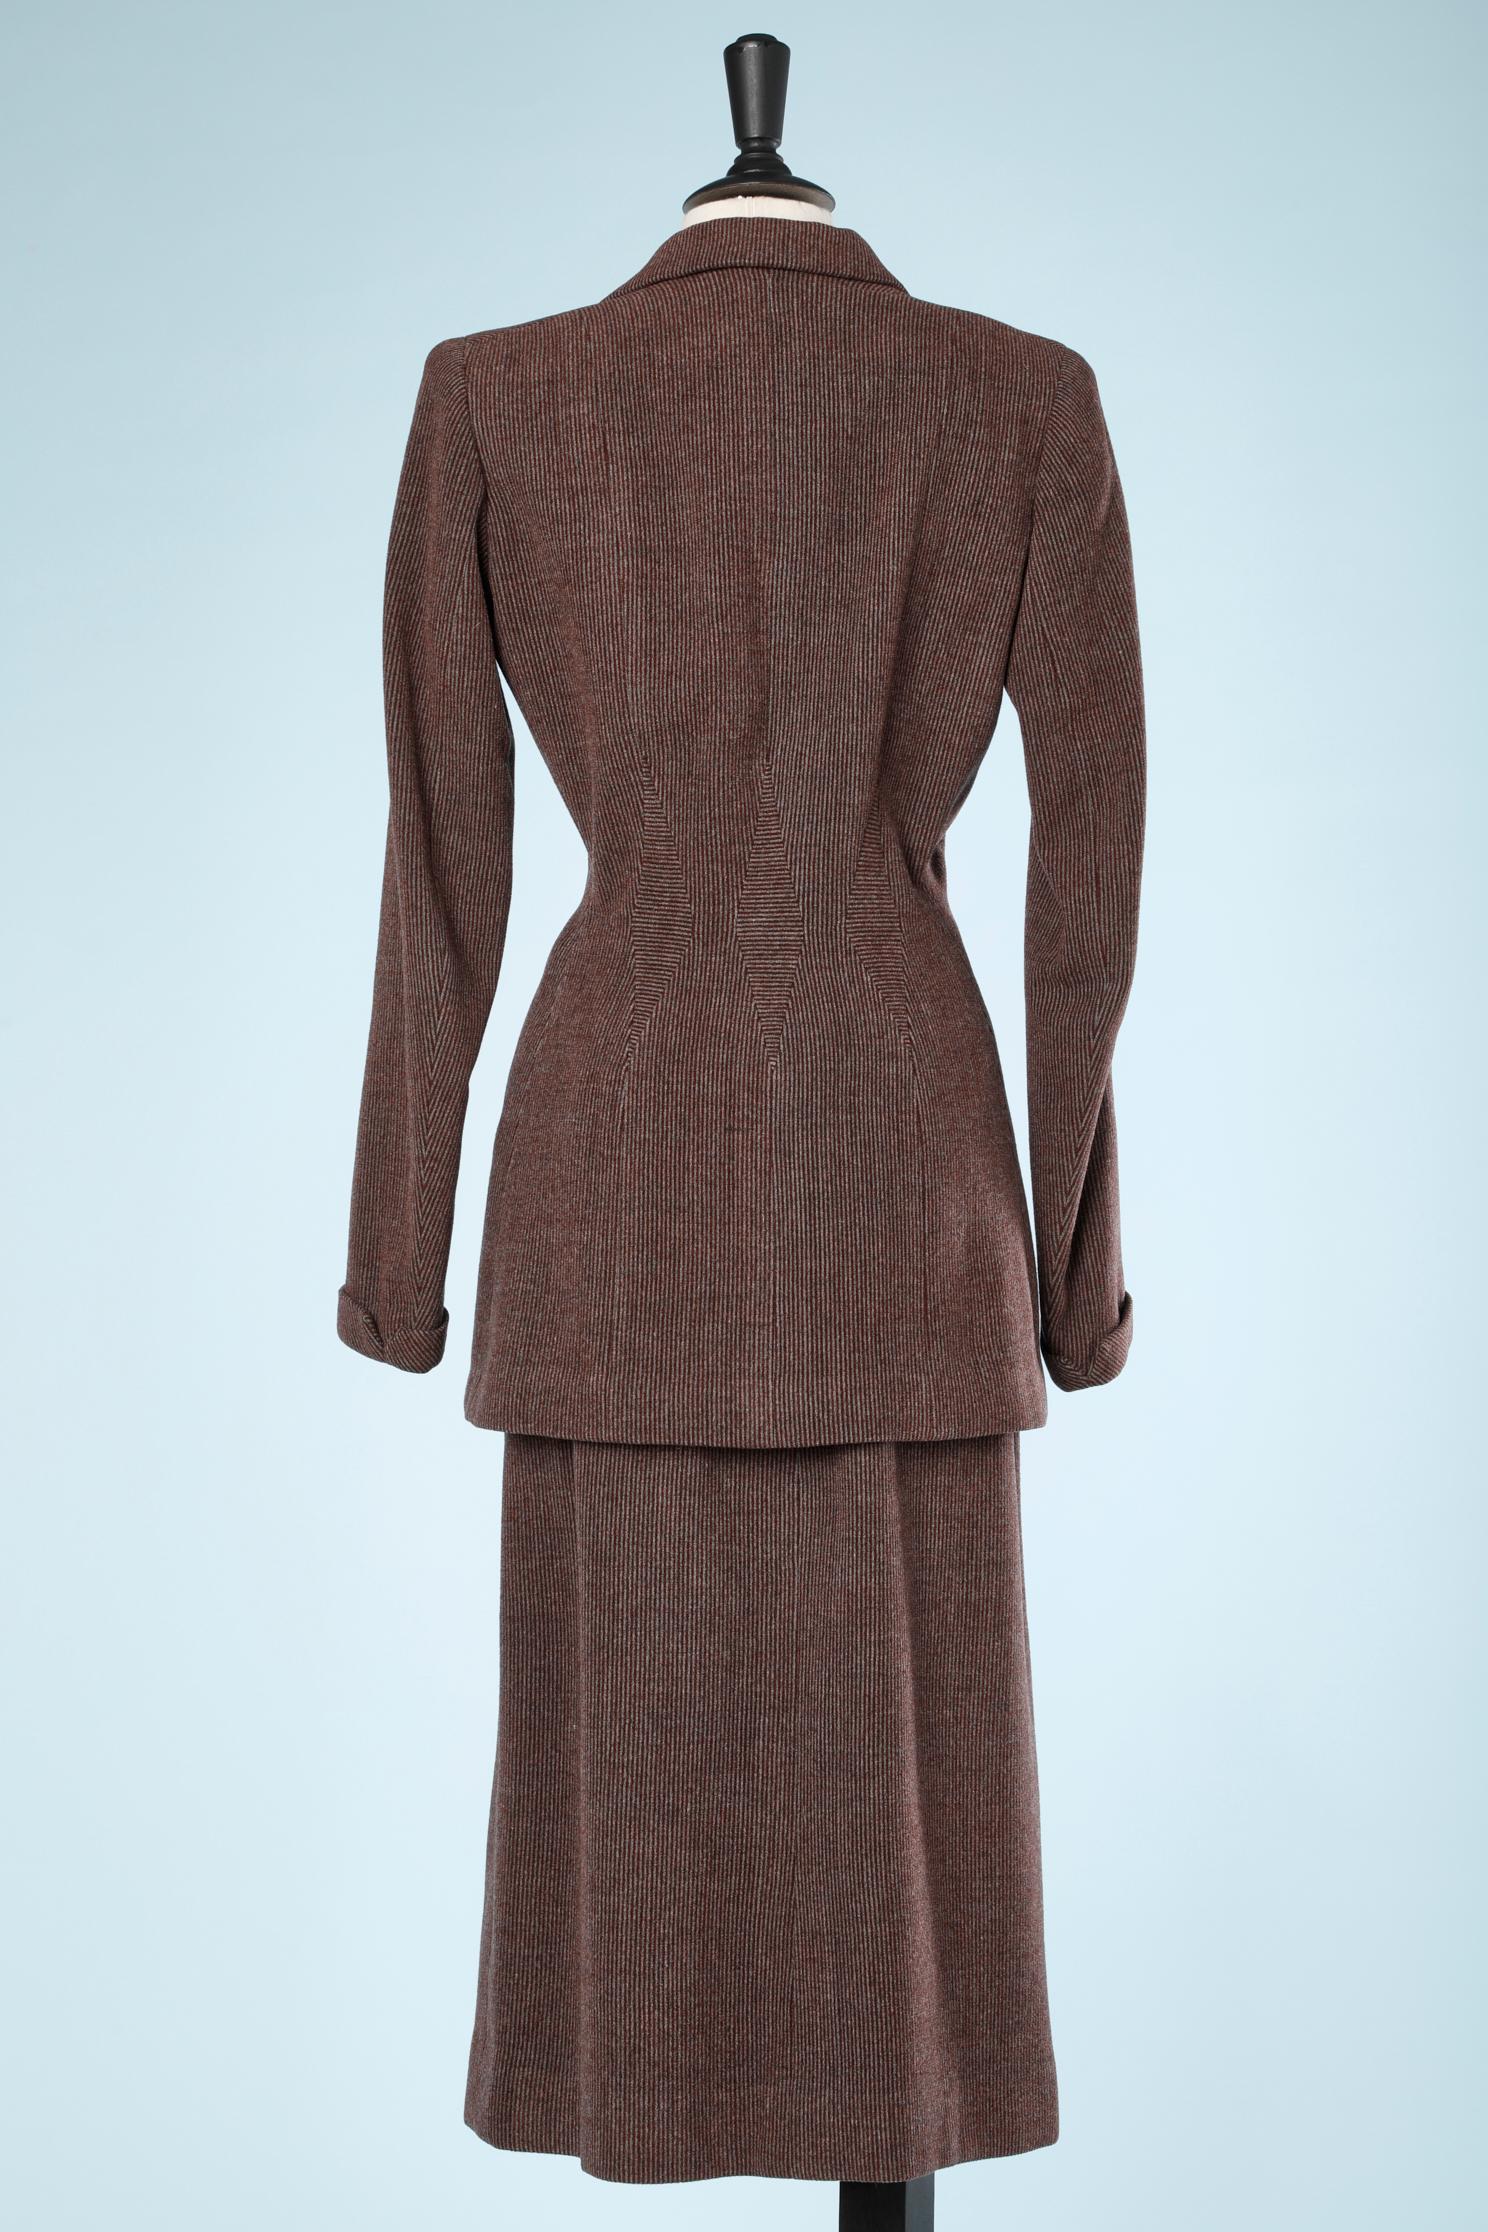 Women's Maggy Rouff numbered Skirt-suit Circa 1940  For Sale